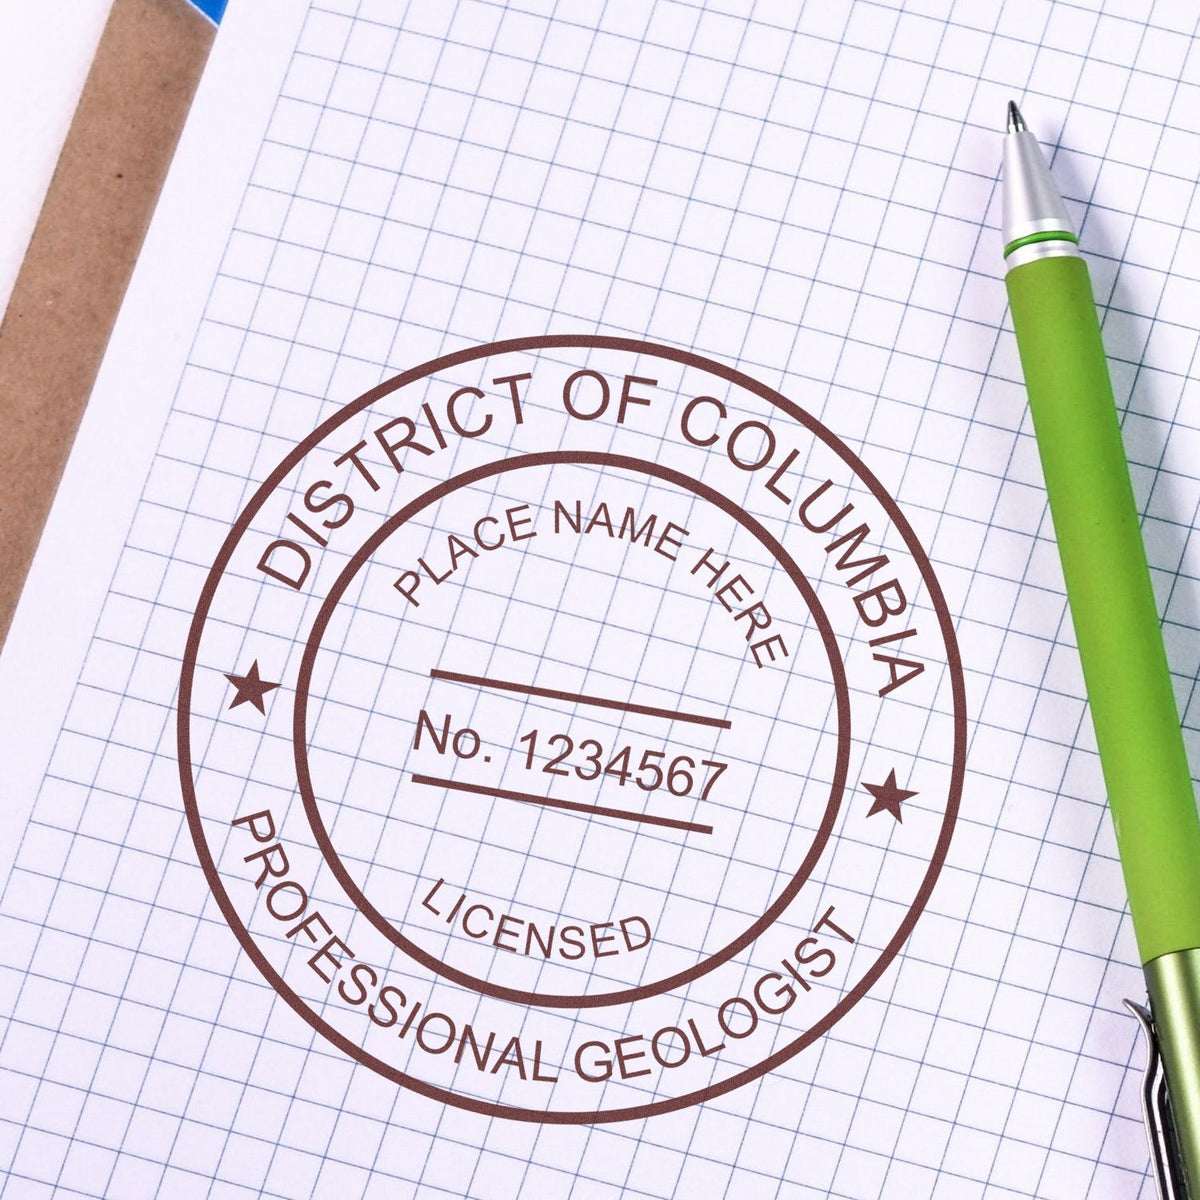 Another Example of a stamped impression of the District of Columbia Professional Geologist Seal Stamp on a office form